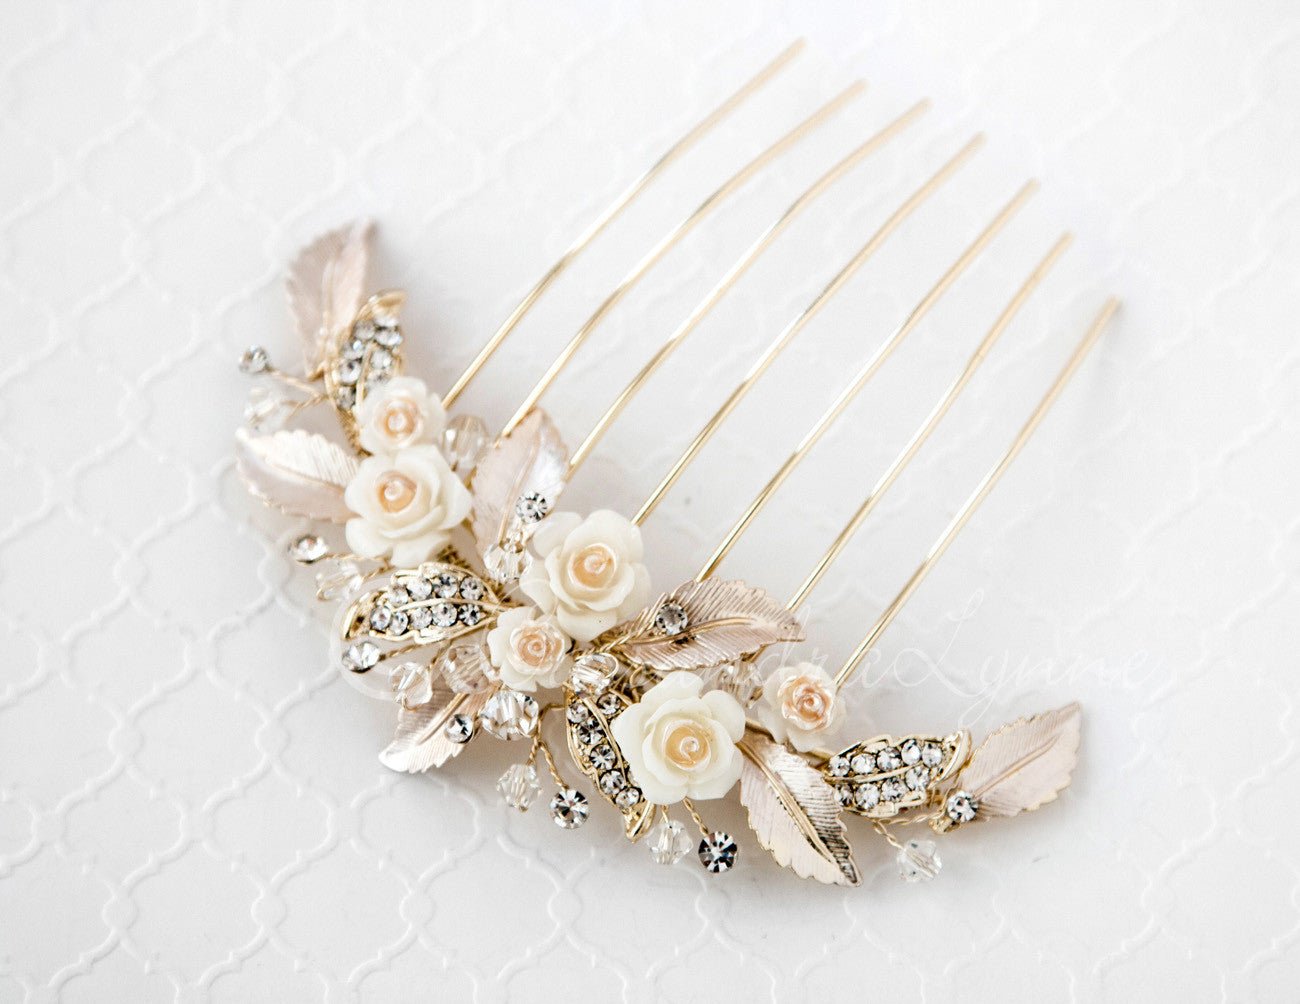 Bridal Veil Comb of Porcelain Flowers and Light Gold Leaves